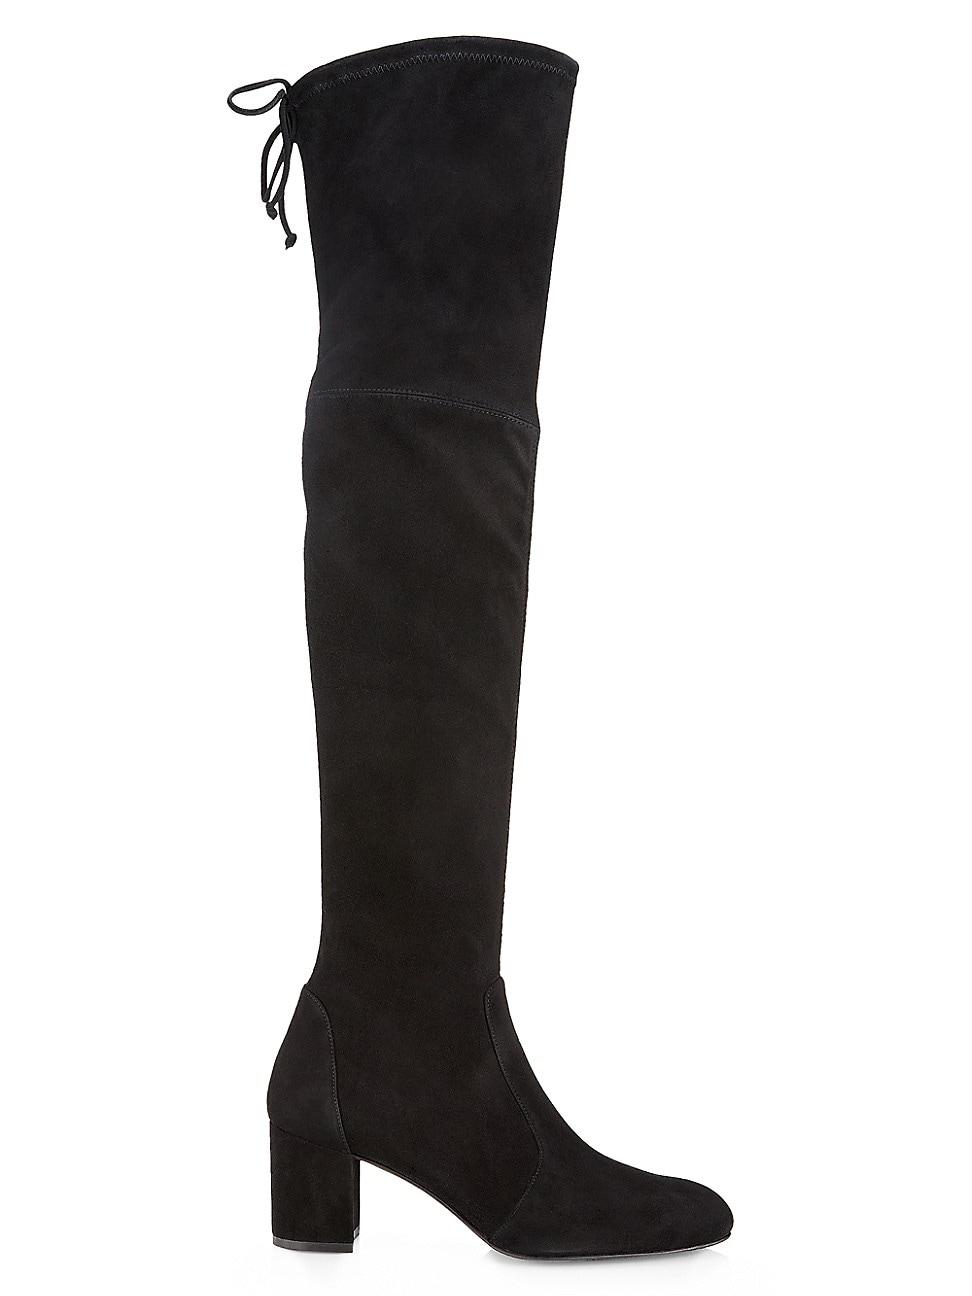 Stuart Weitzman Yulianaland 60mm Leather Over-the-knee Boots in Black | Lyst